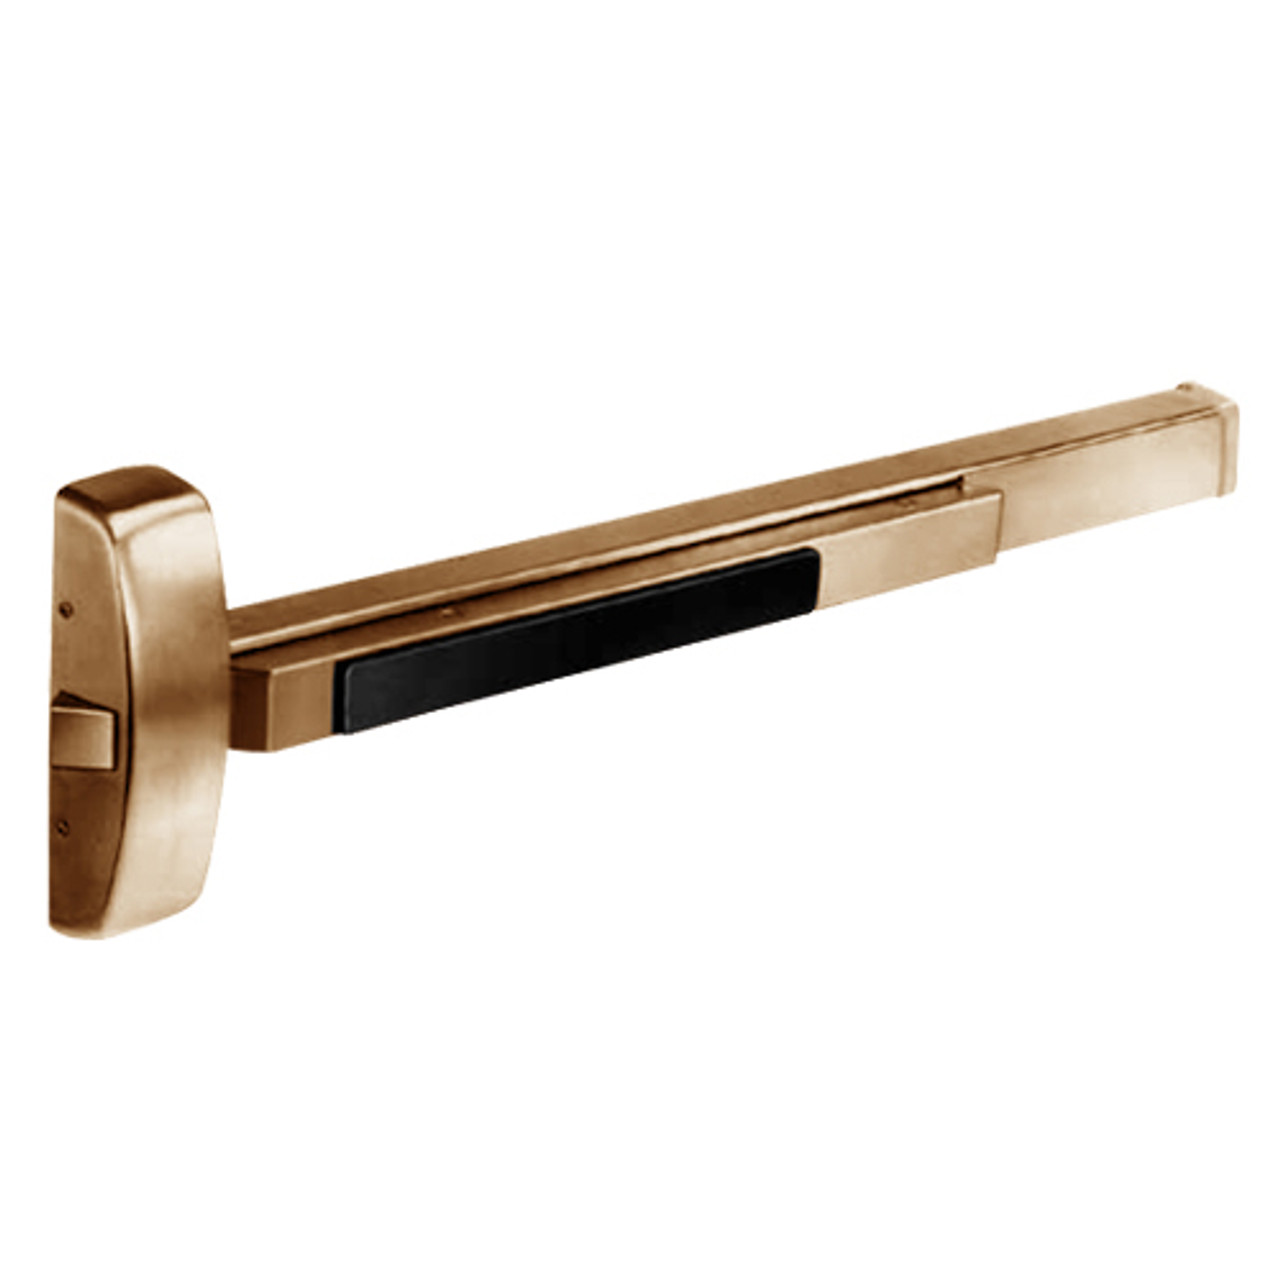 12-8888G-10 Sargent 80 Series Fire Rated Multi-Function Rim Exit Device in Satin Bronze